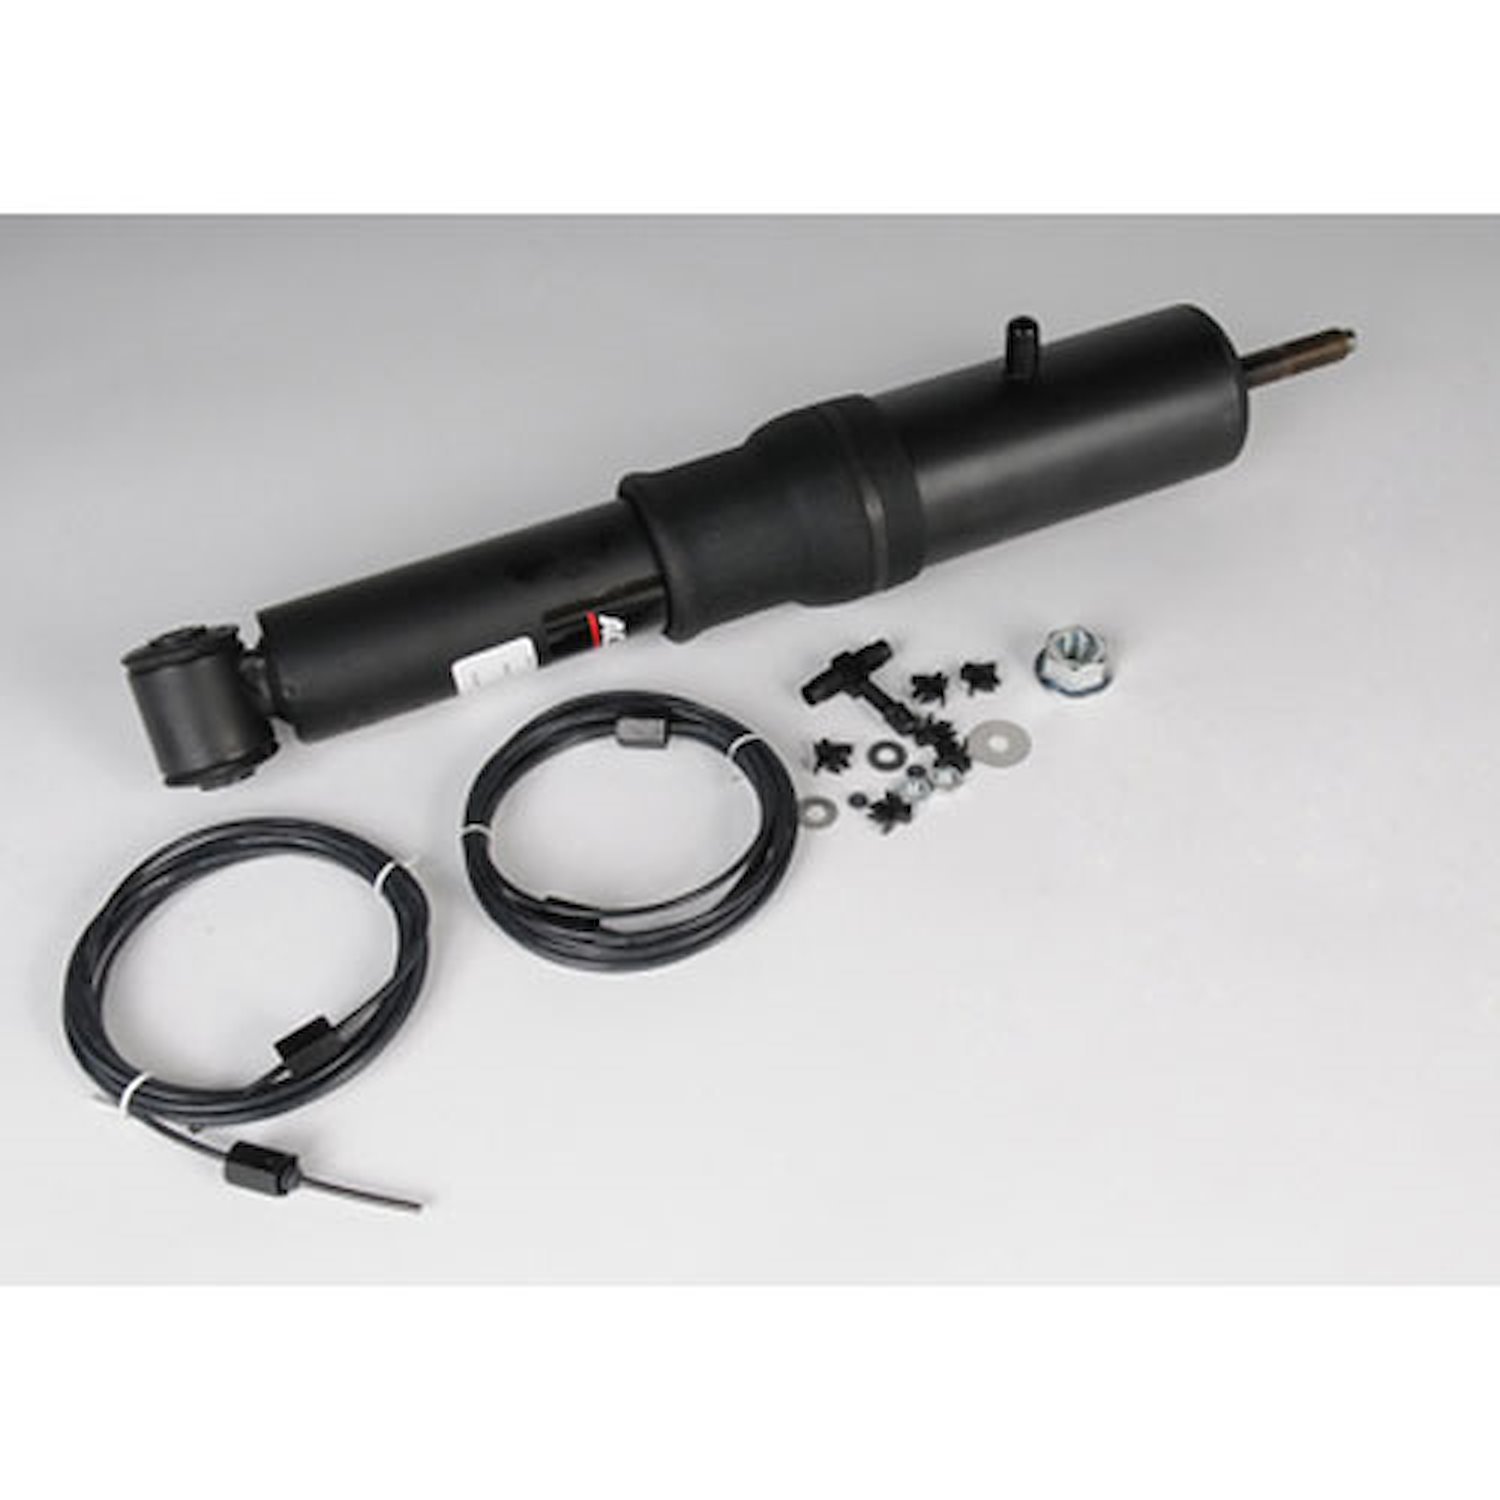 Rear Air Ride Shock Absorber Kit for Select 1997-2002 Cadillac